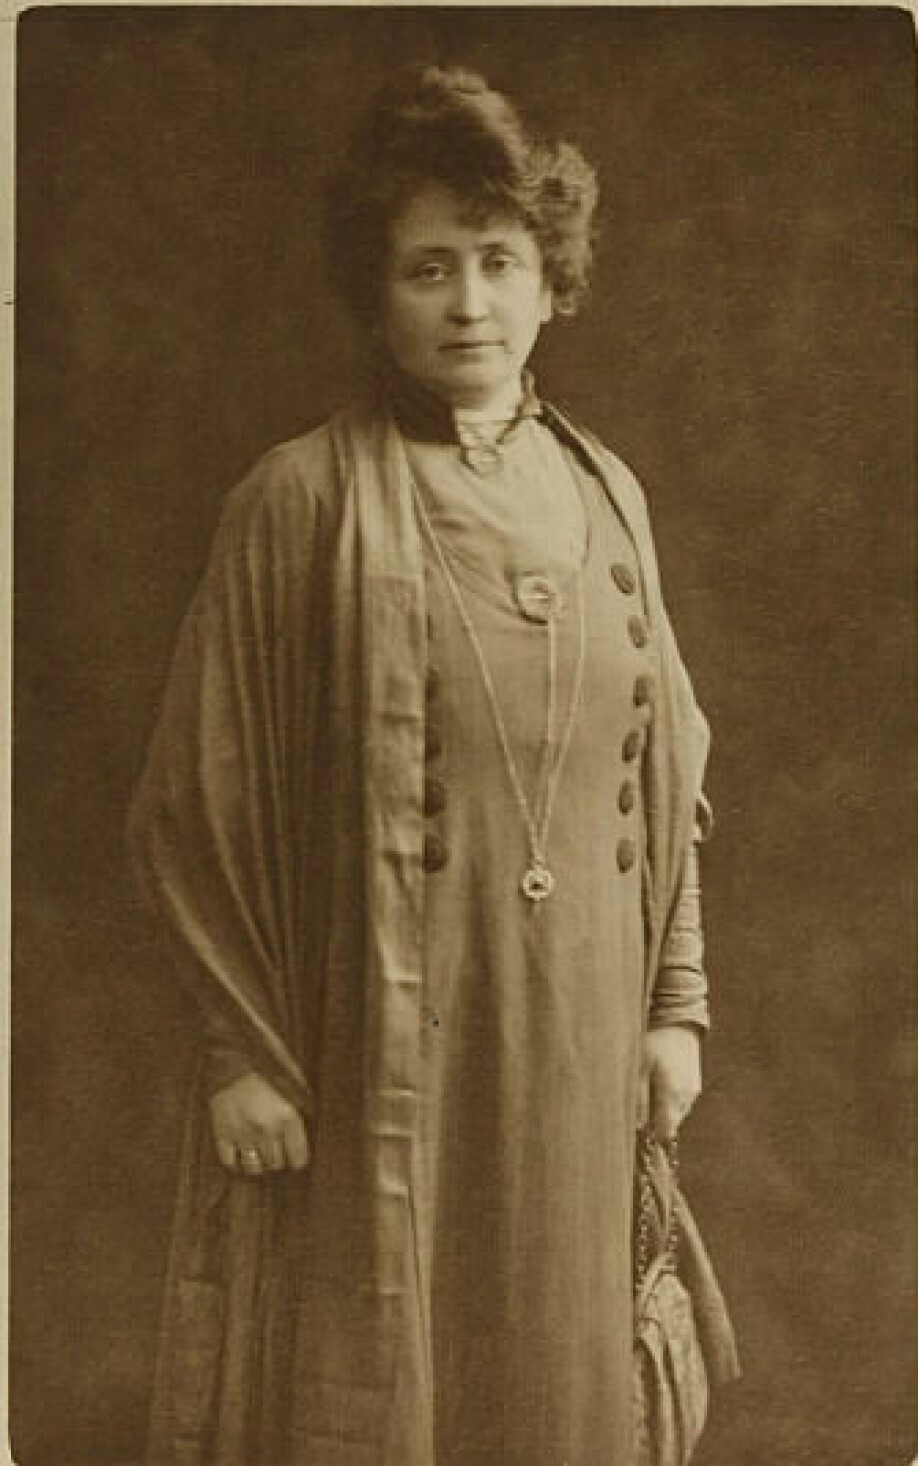 Hulda Garborg was an author and activist who used the Norwegian language, culture and traditions. This picture is from 1912.